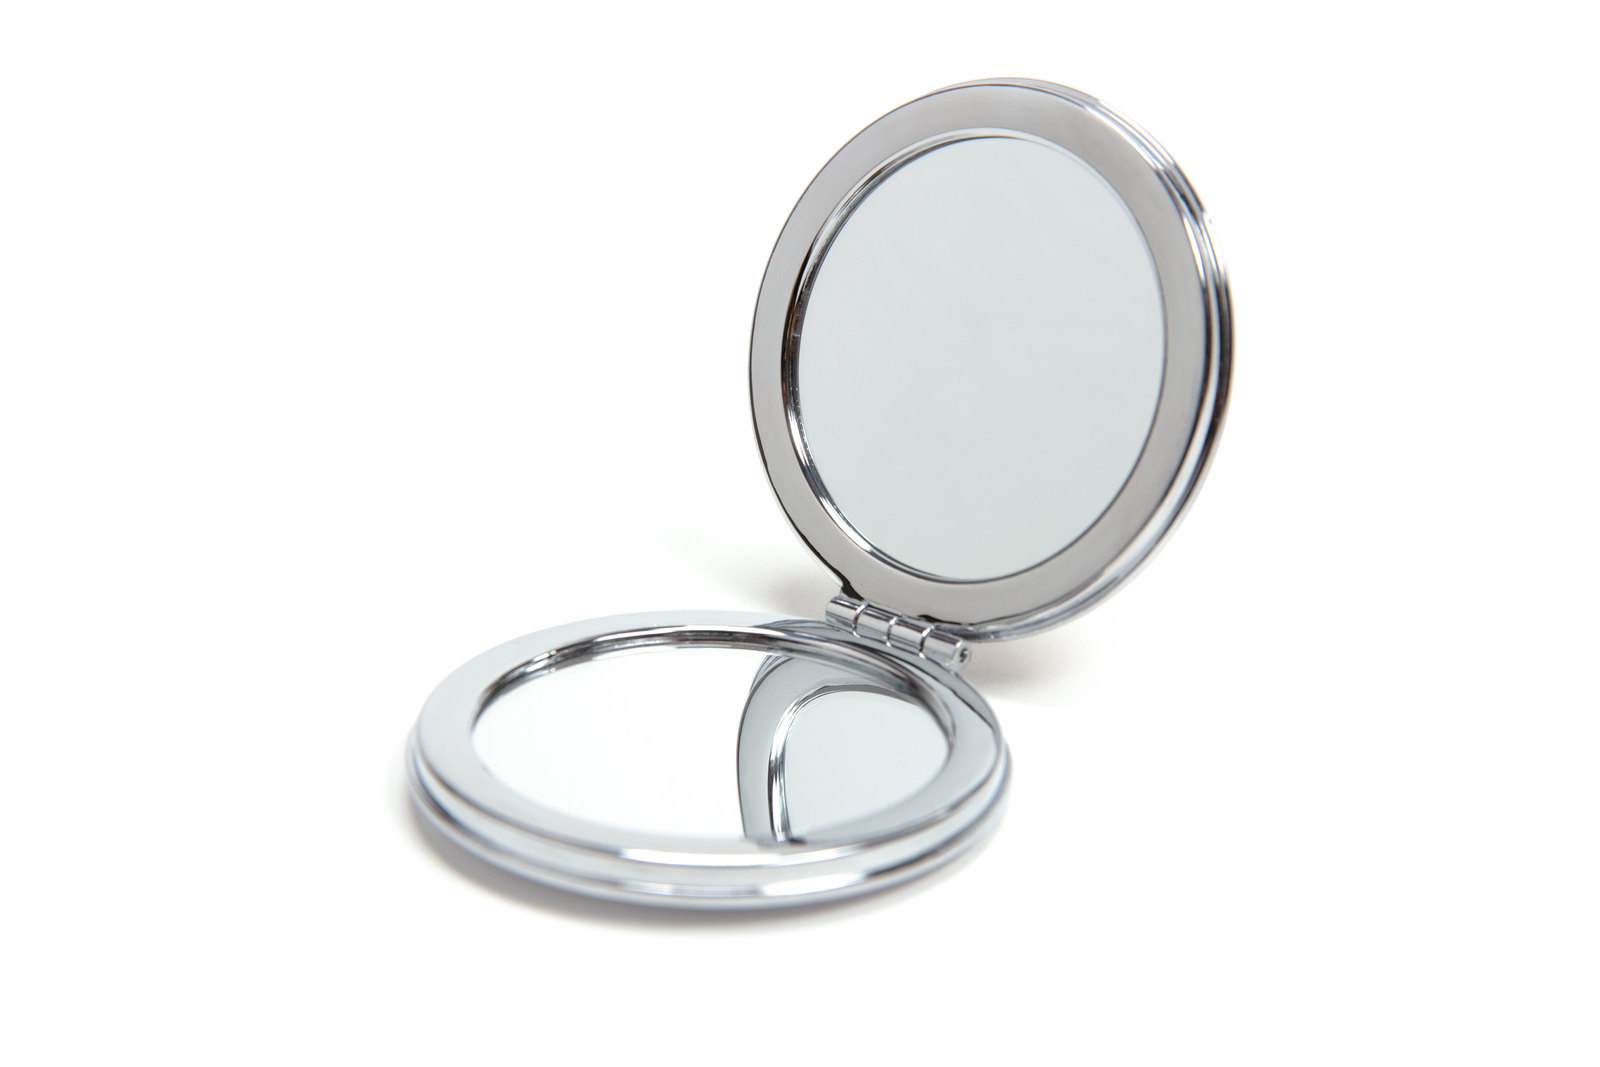 Mad Ally Compact Mirror; Leave a Little Sparkle